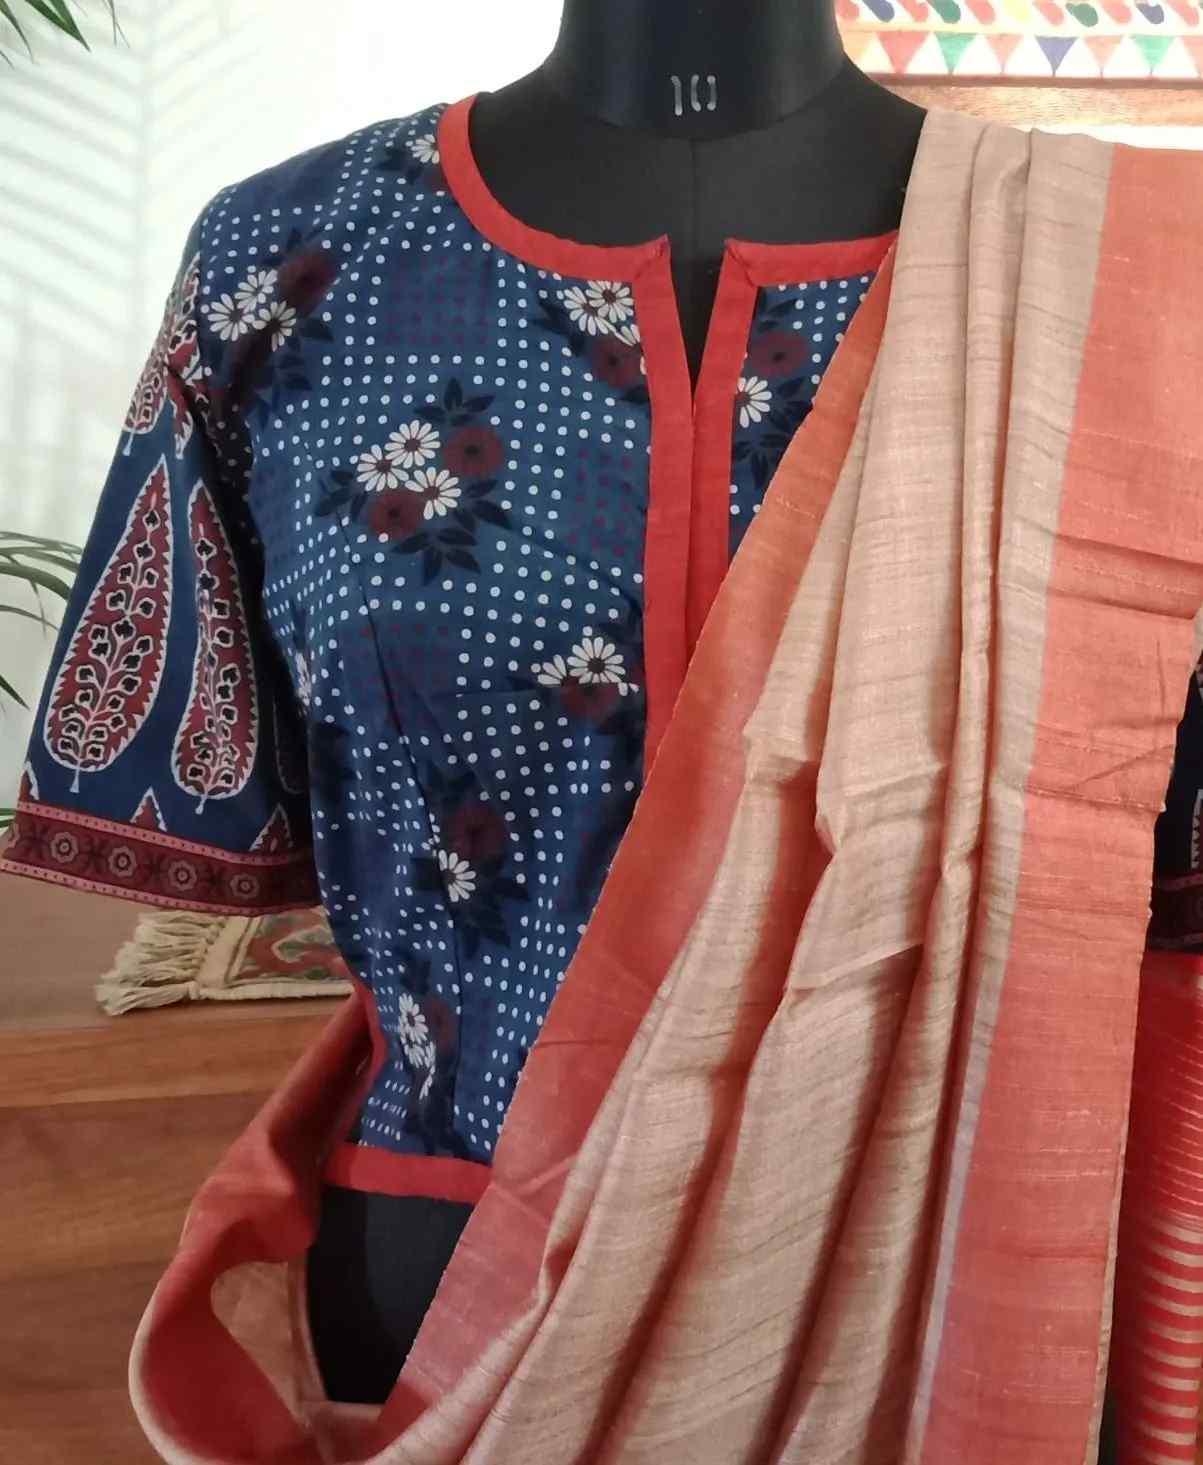 55 Net Blouse Designs for Women with Latest Images 2022 - Tips and Beauty |  Net saree blouse designs, Netted blouse designs, Net blouses